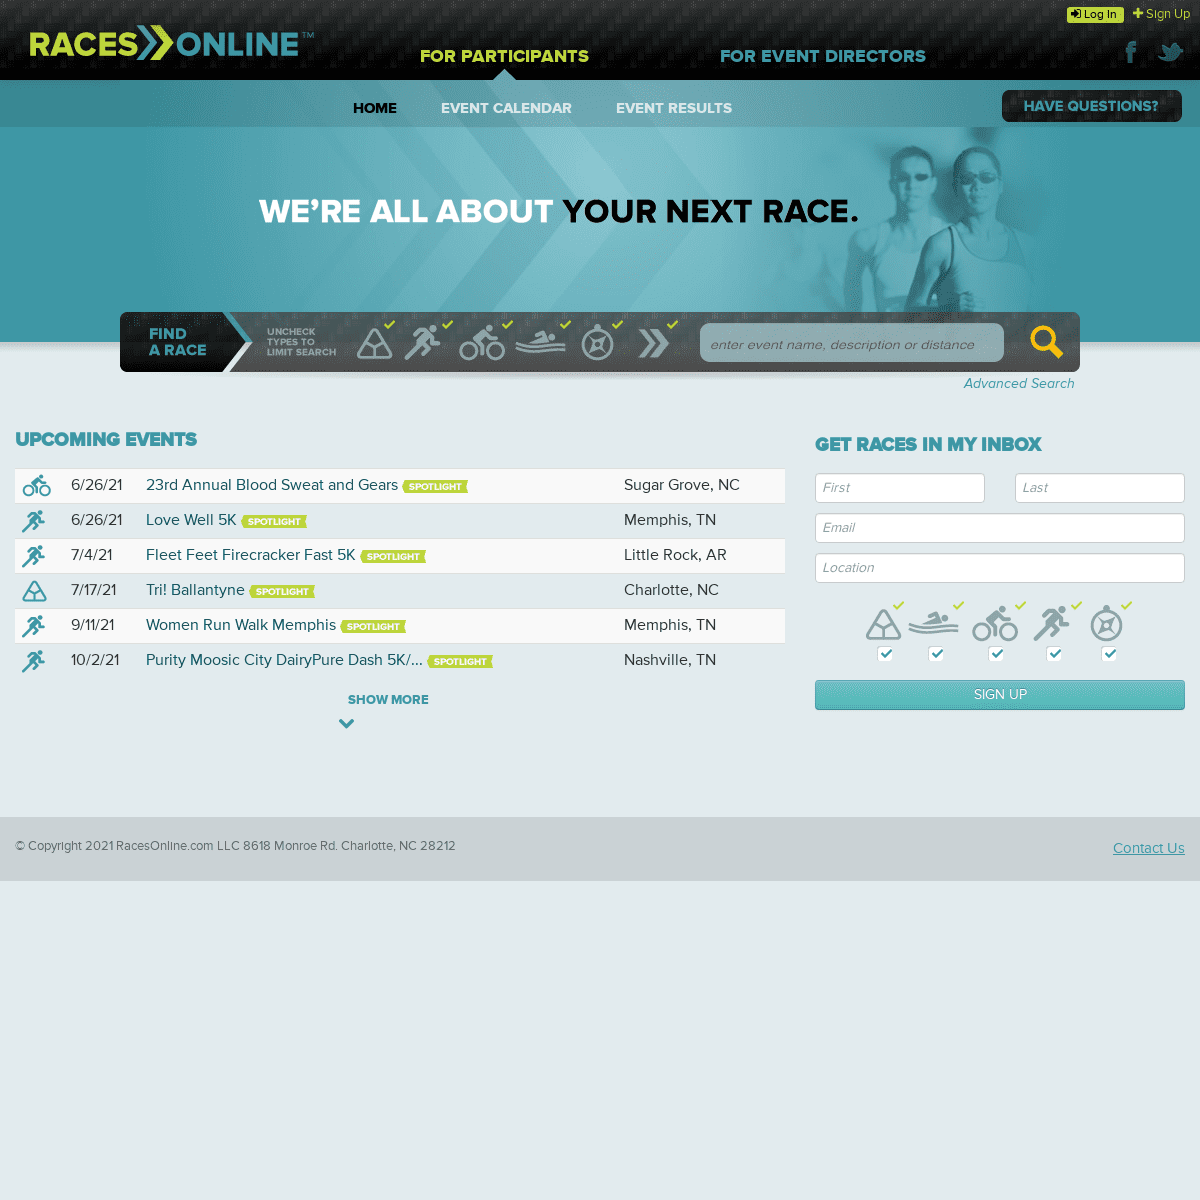 A complete backup of https://racesonline.com